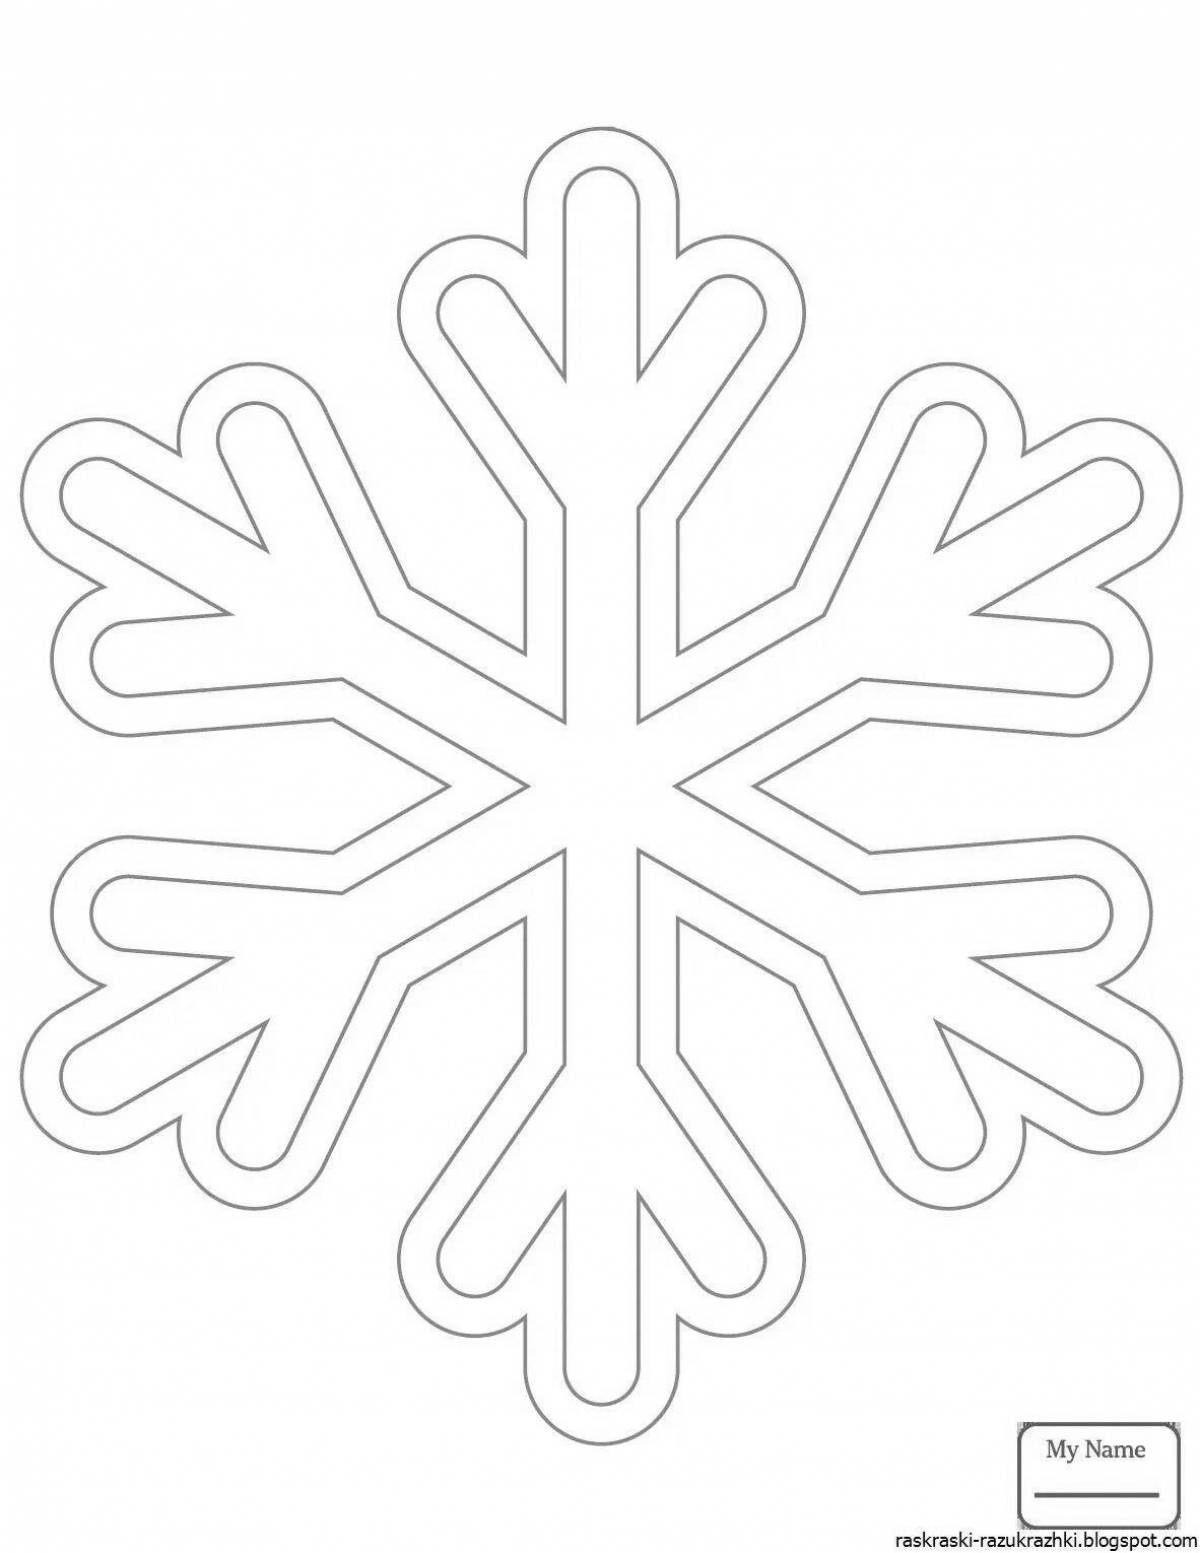 Gorgeous snowflake coloring page